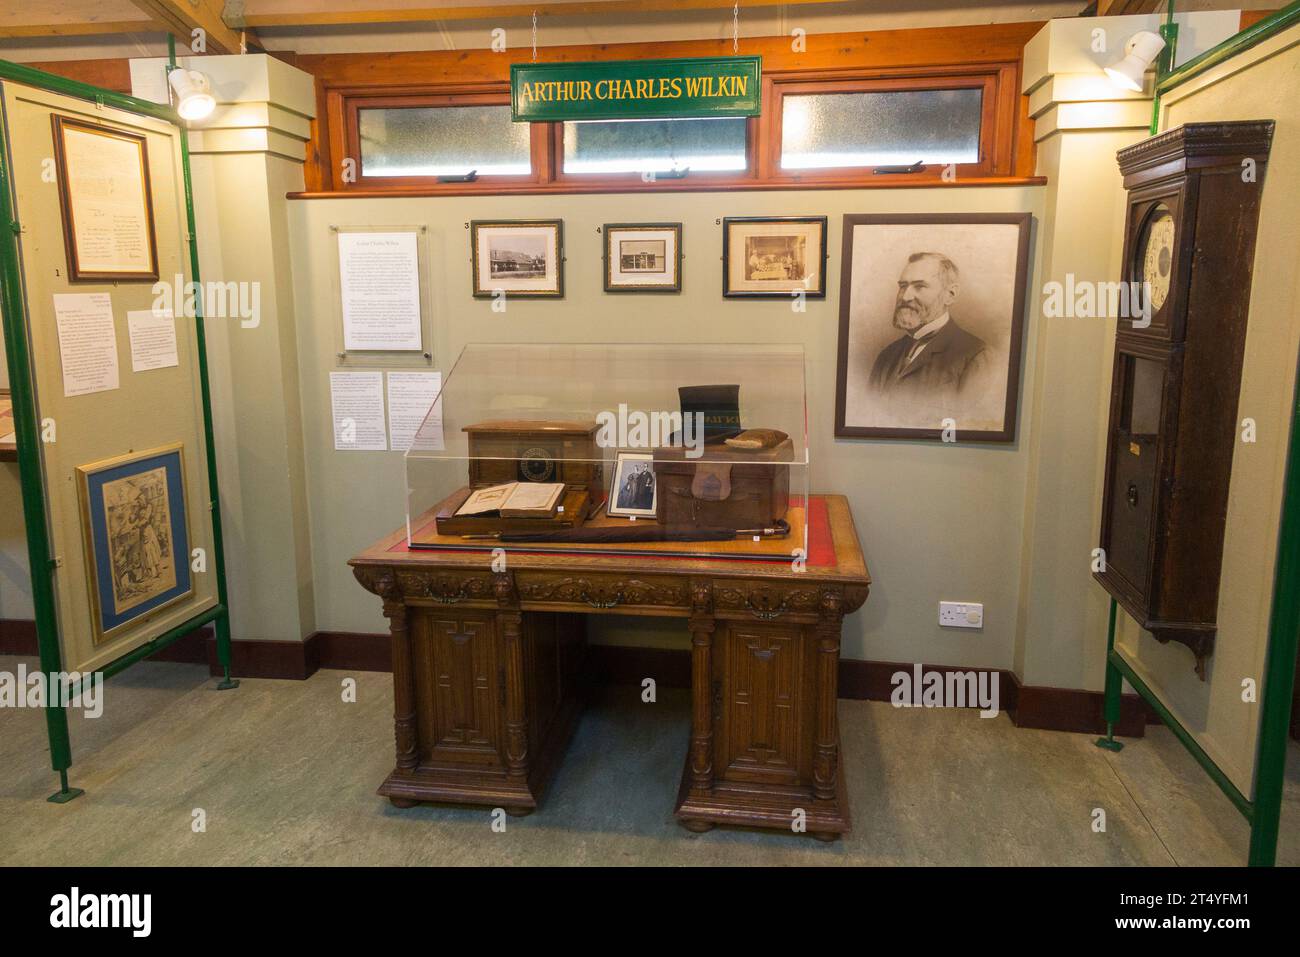 Interior display of original office desk at the Jam Museum, Wilkin & Sons Limited, manufacturer of preserves since 1885, Tiptree, Essex, UK (136) Stock Photo